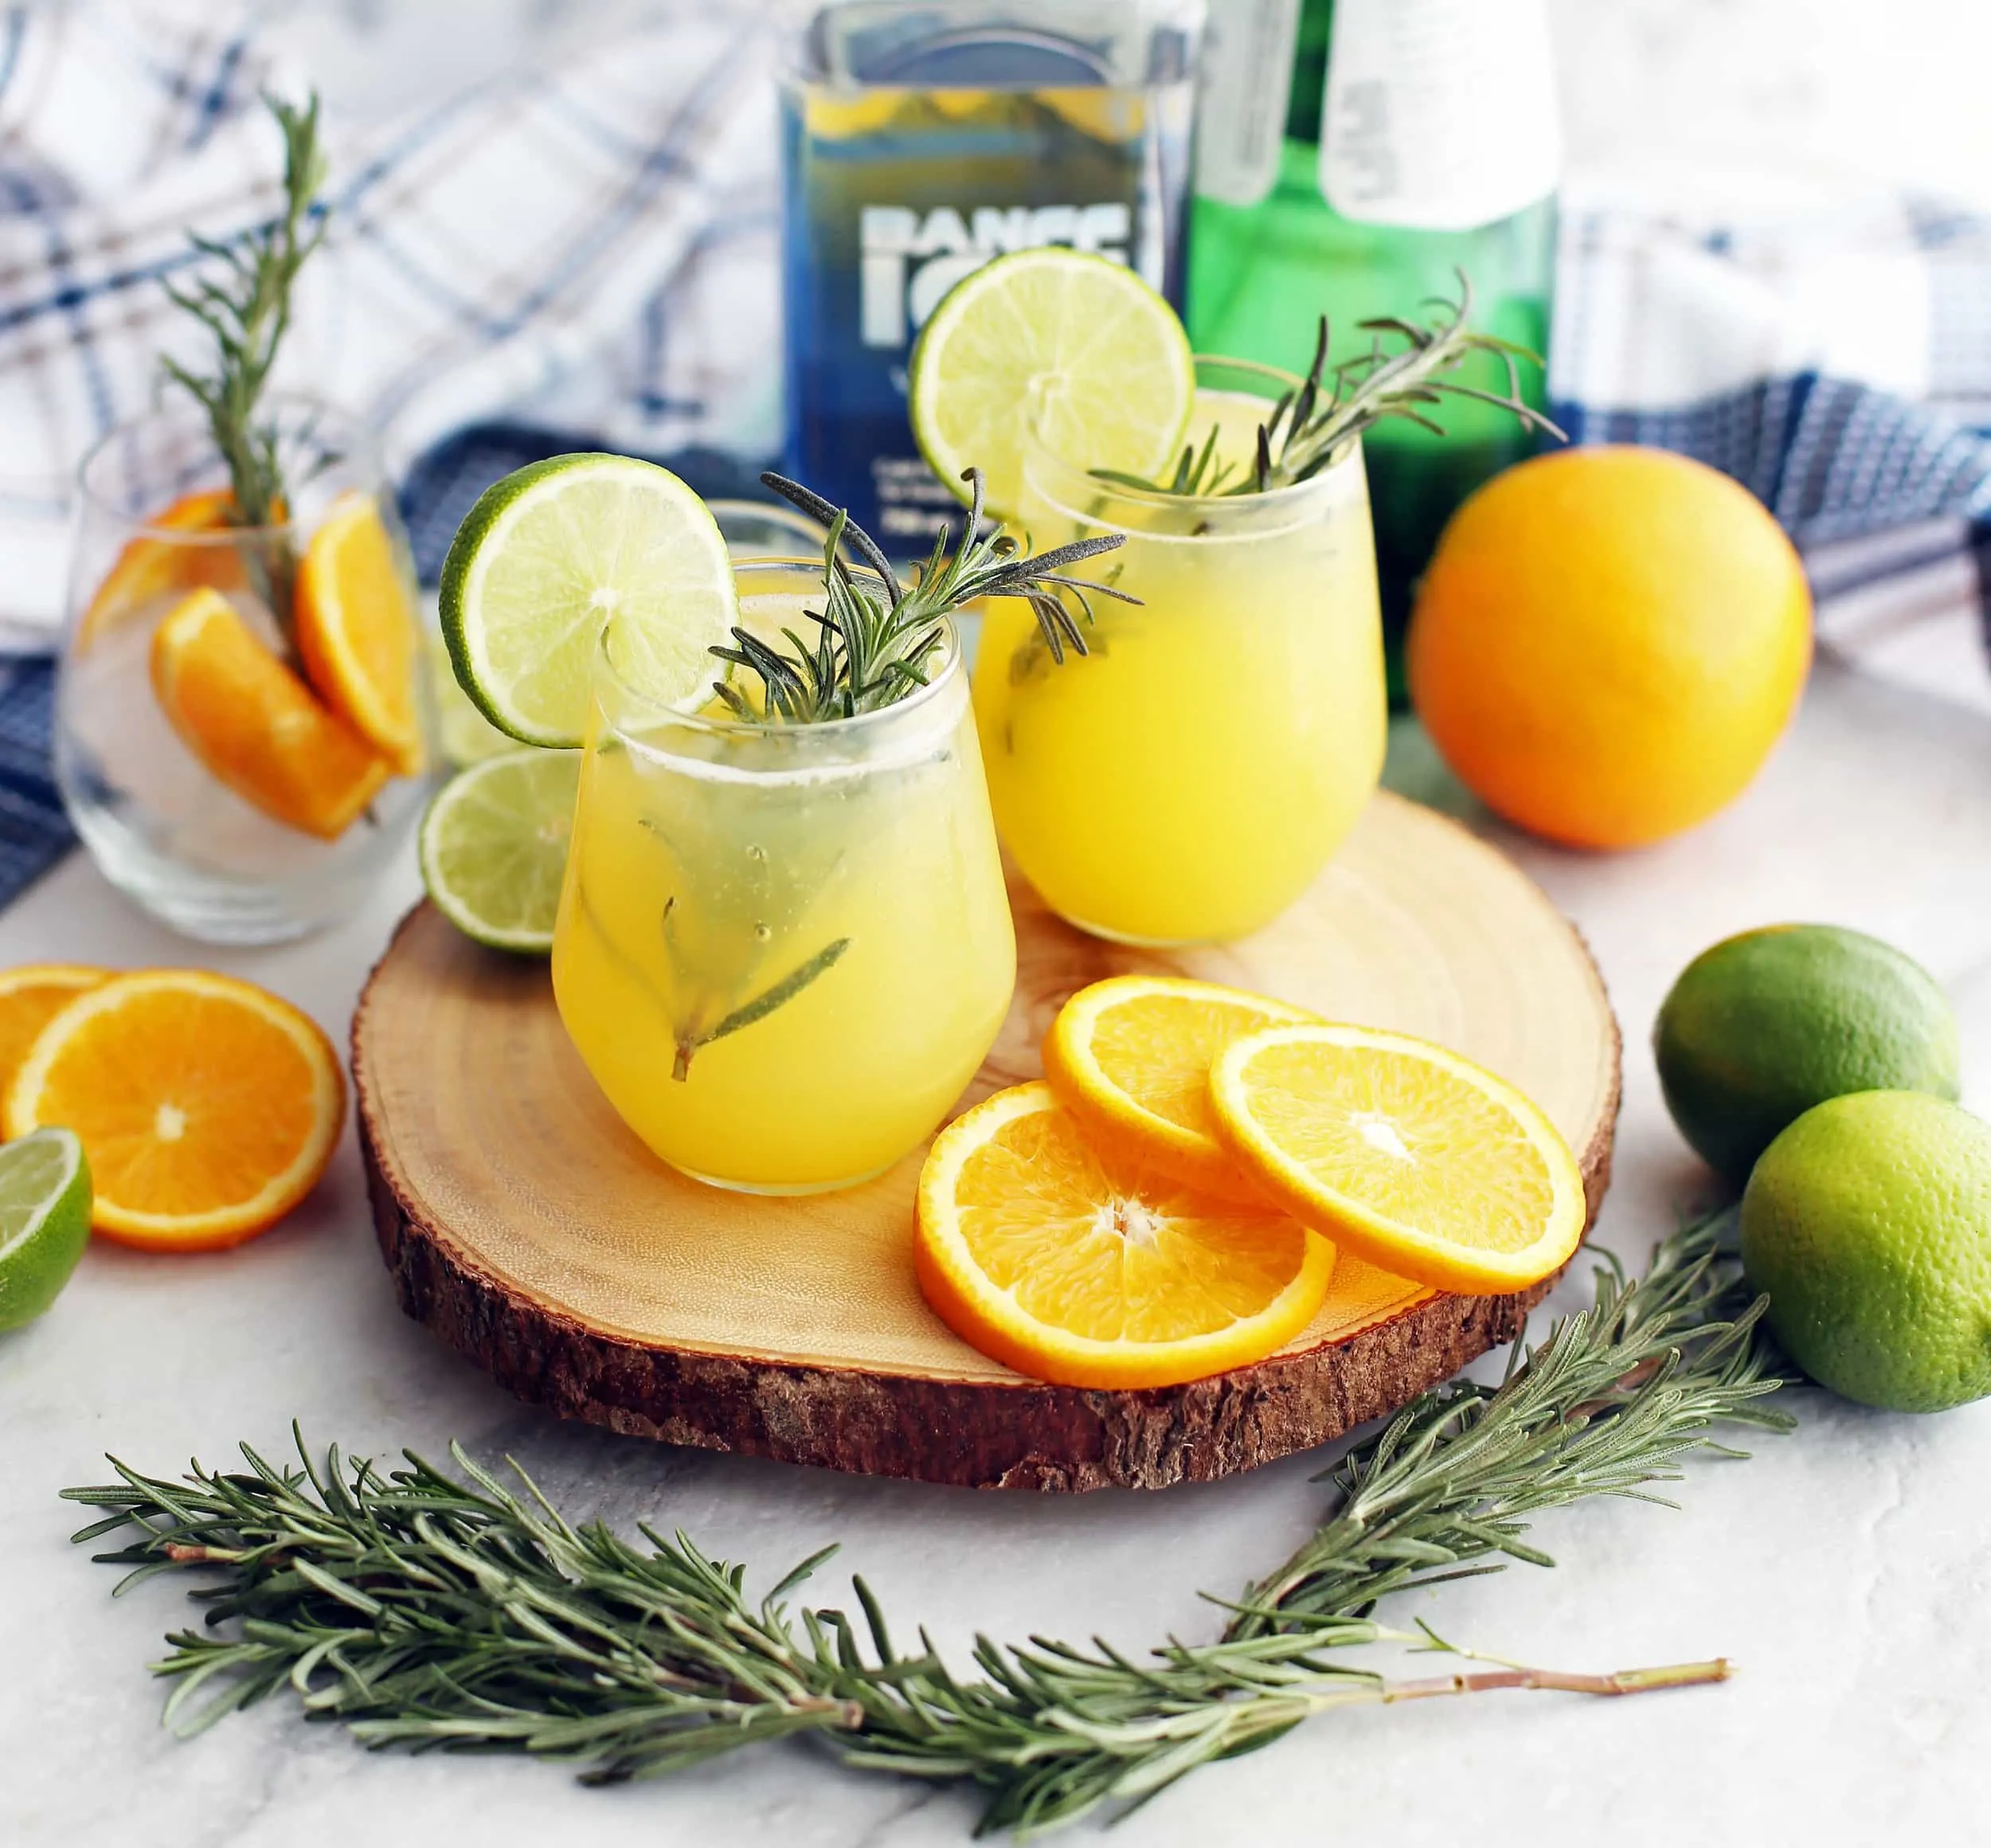 A side view of two glasses of sparkling maple orange vodka with fresh rosemary sprigs, lime slices,and orange slices.